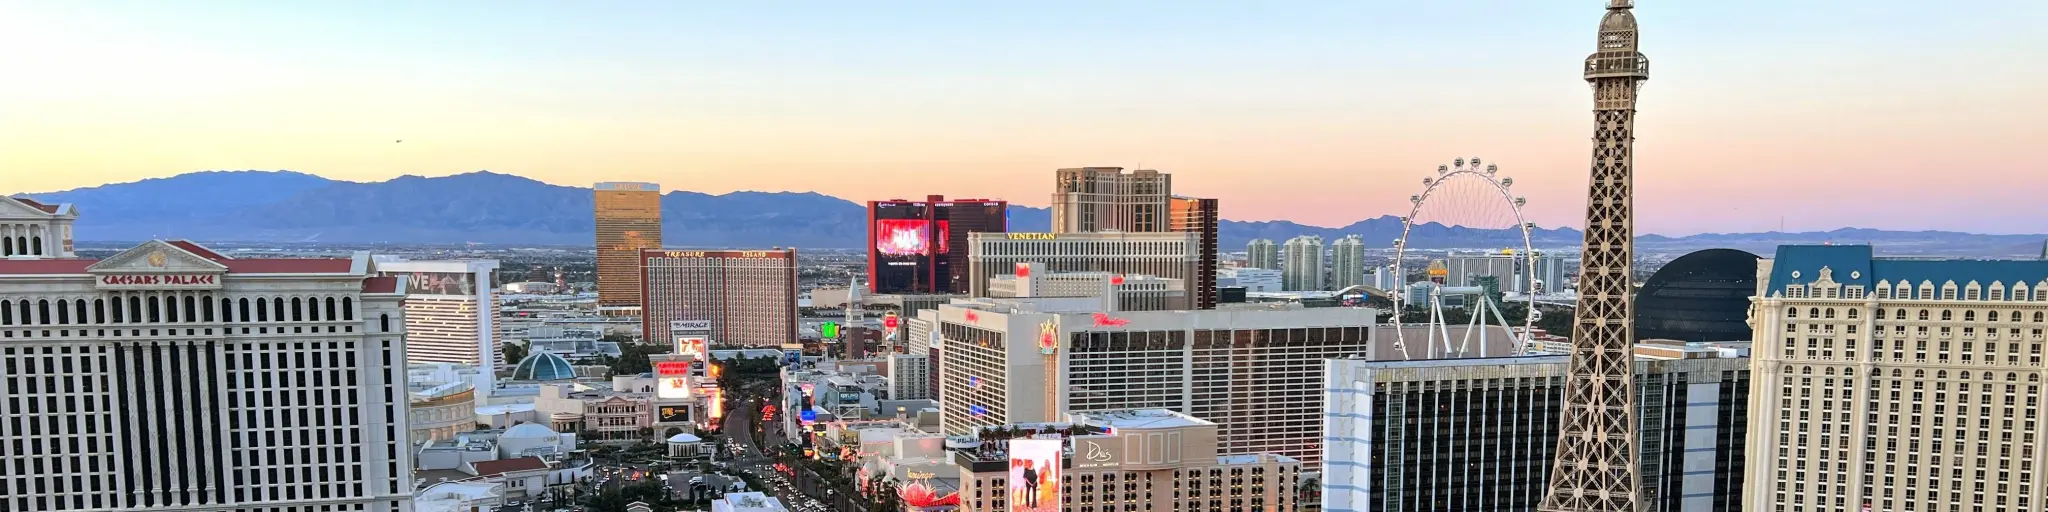 Aerial view of the Strip during dusk with famous hotels and casinos in focus